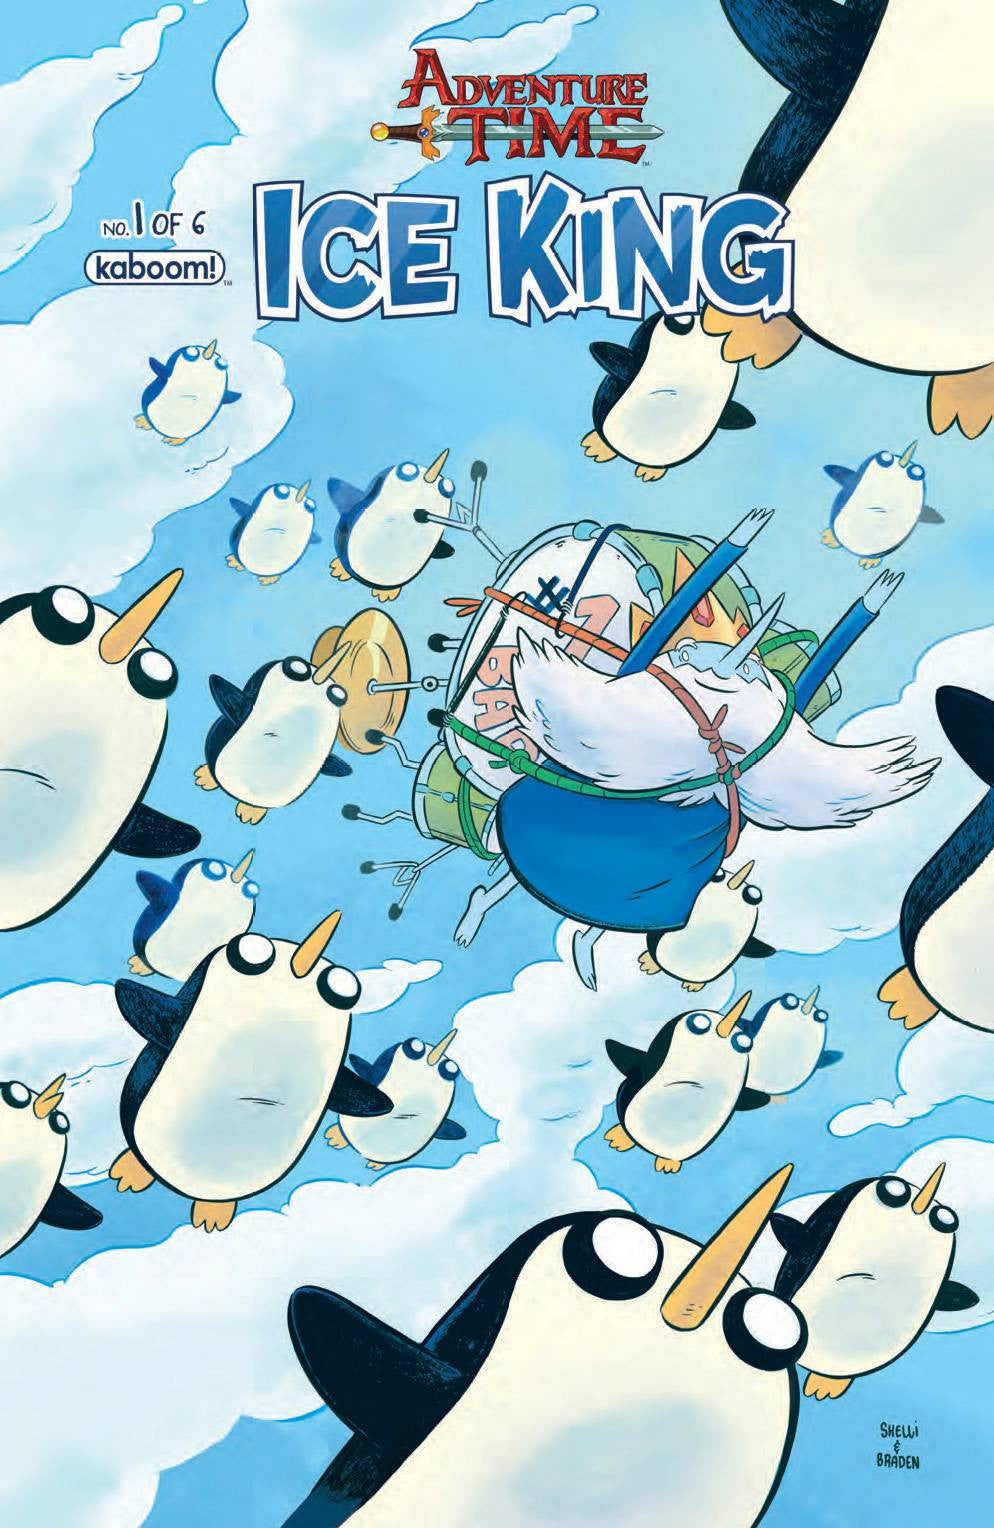 ADVENTURE TIME ICE KING #1 COVER